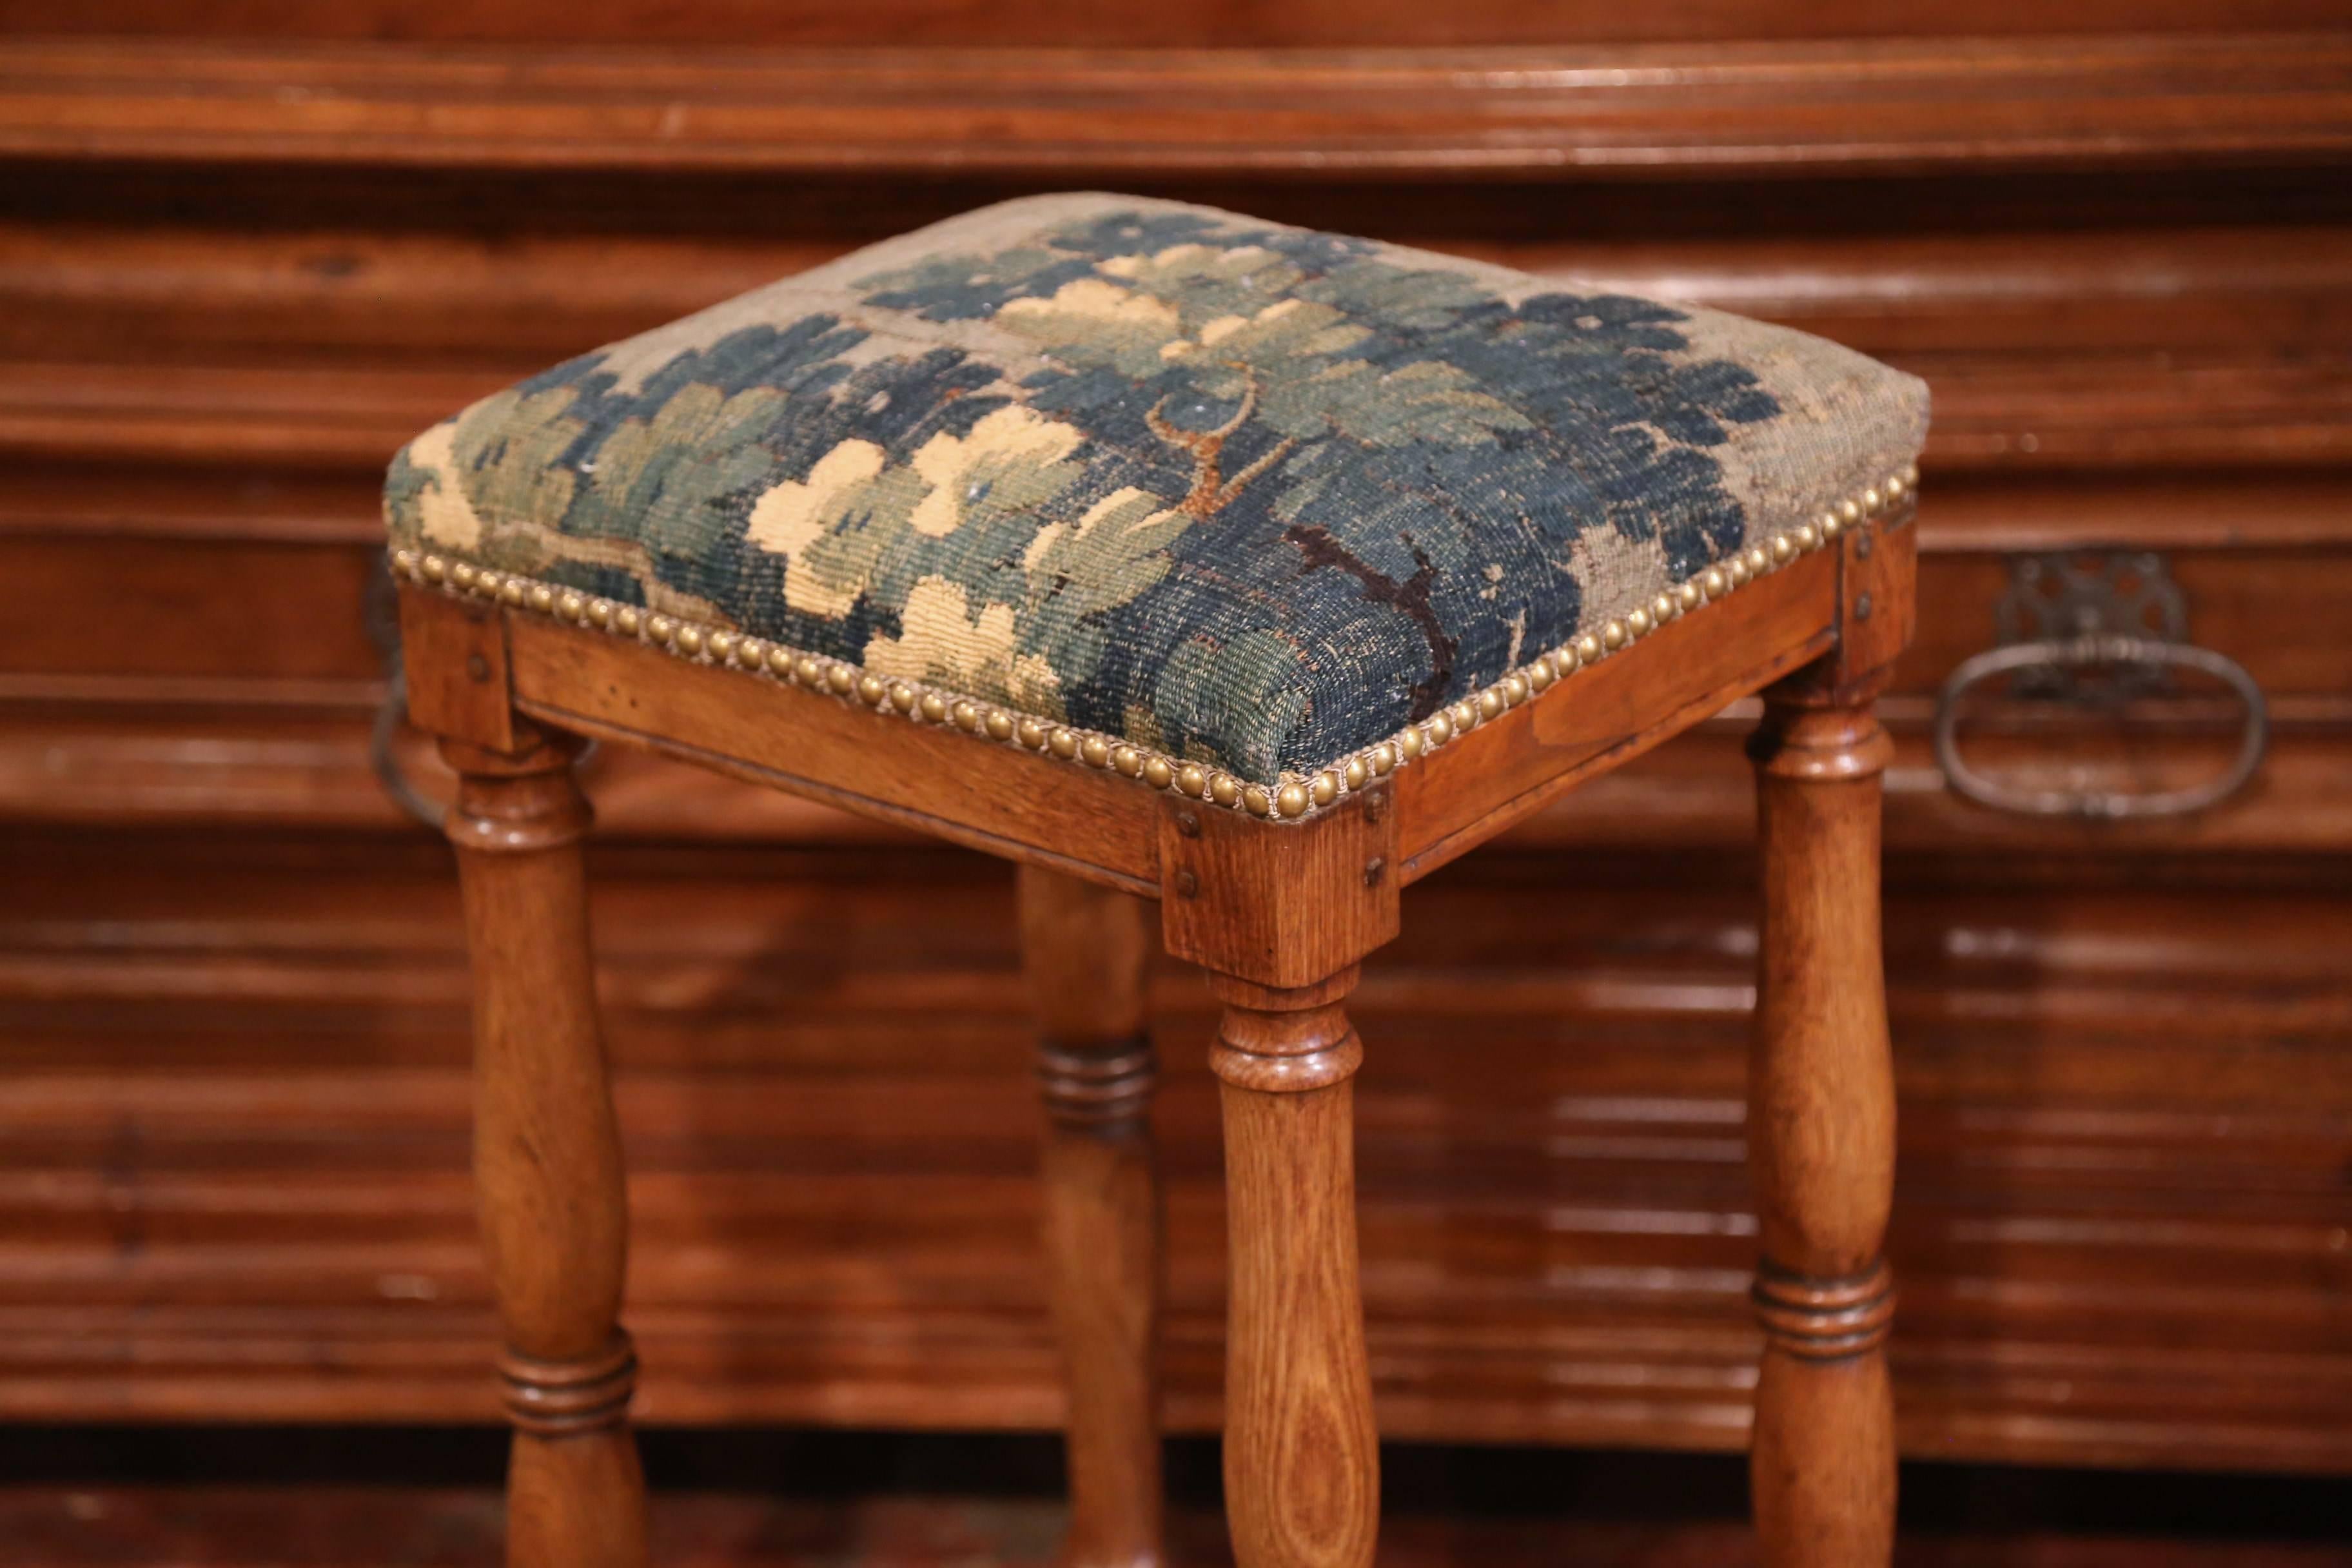 This antique fruitwood Prie-Dieu (or prayer chair), was crafted in France, circa 1790; the bench features four nicely carved turned legs with a bottom stretcher and a platform to rest your knees. The armrest has a verdure Aubusson tapestry with